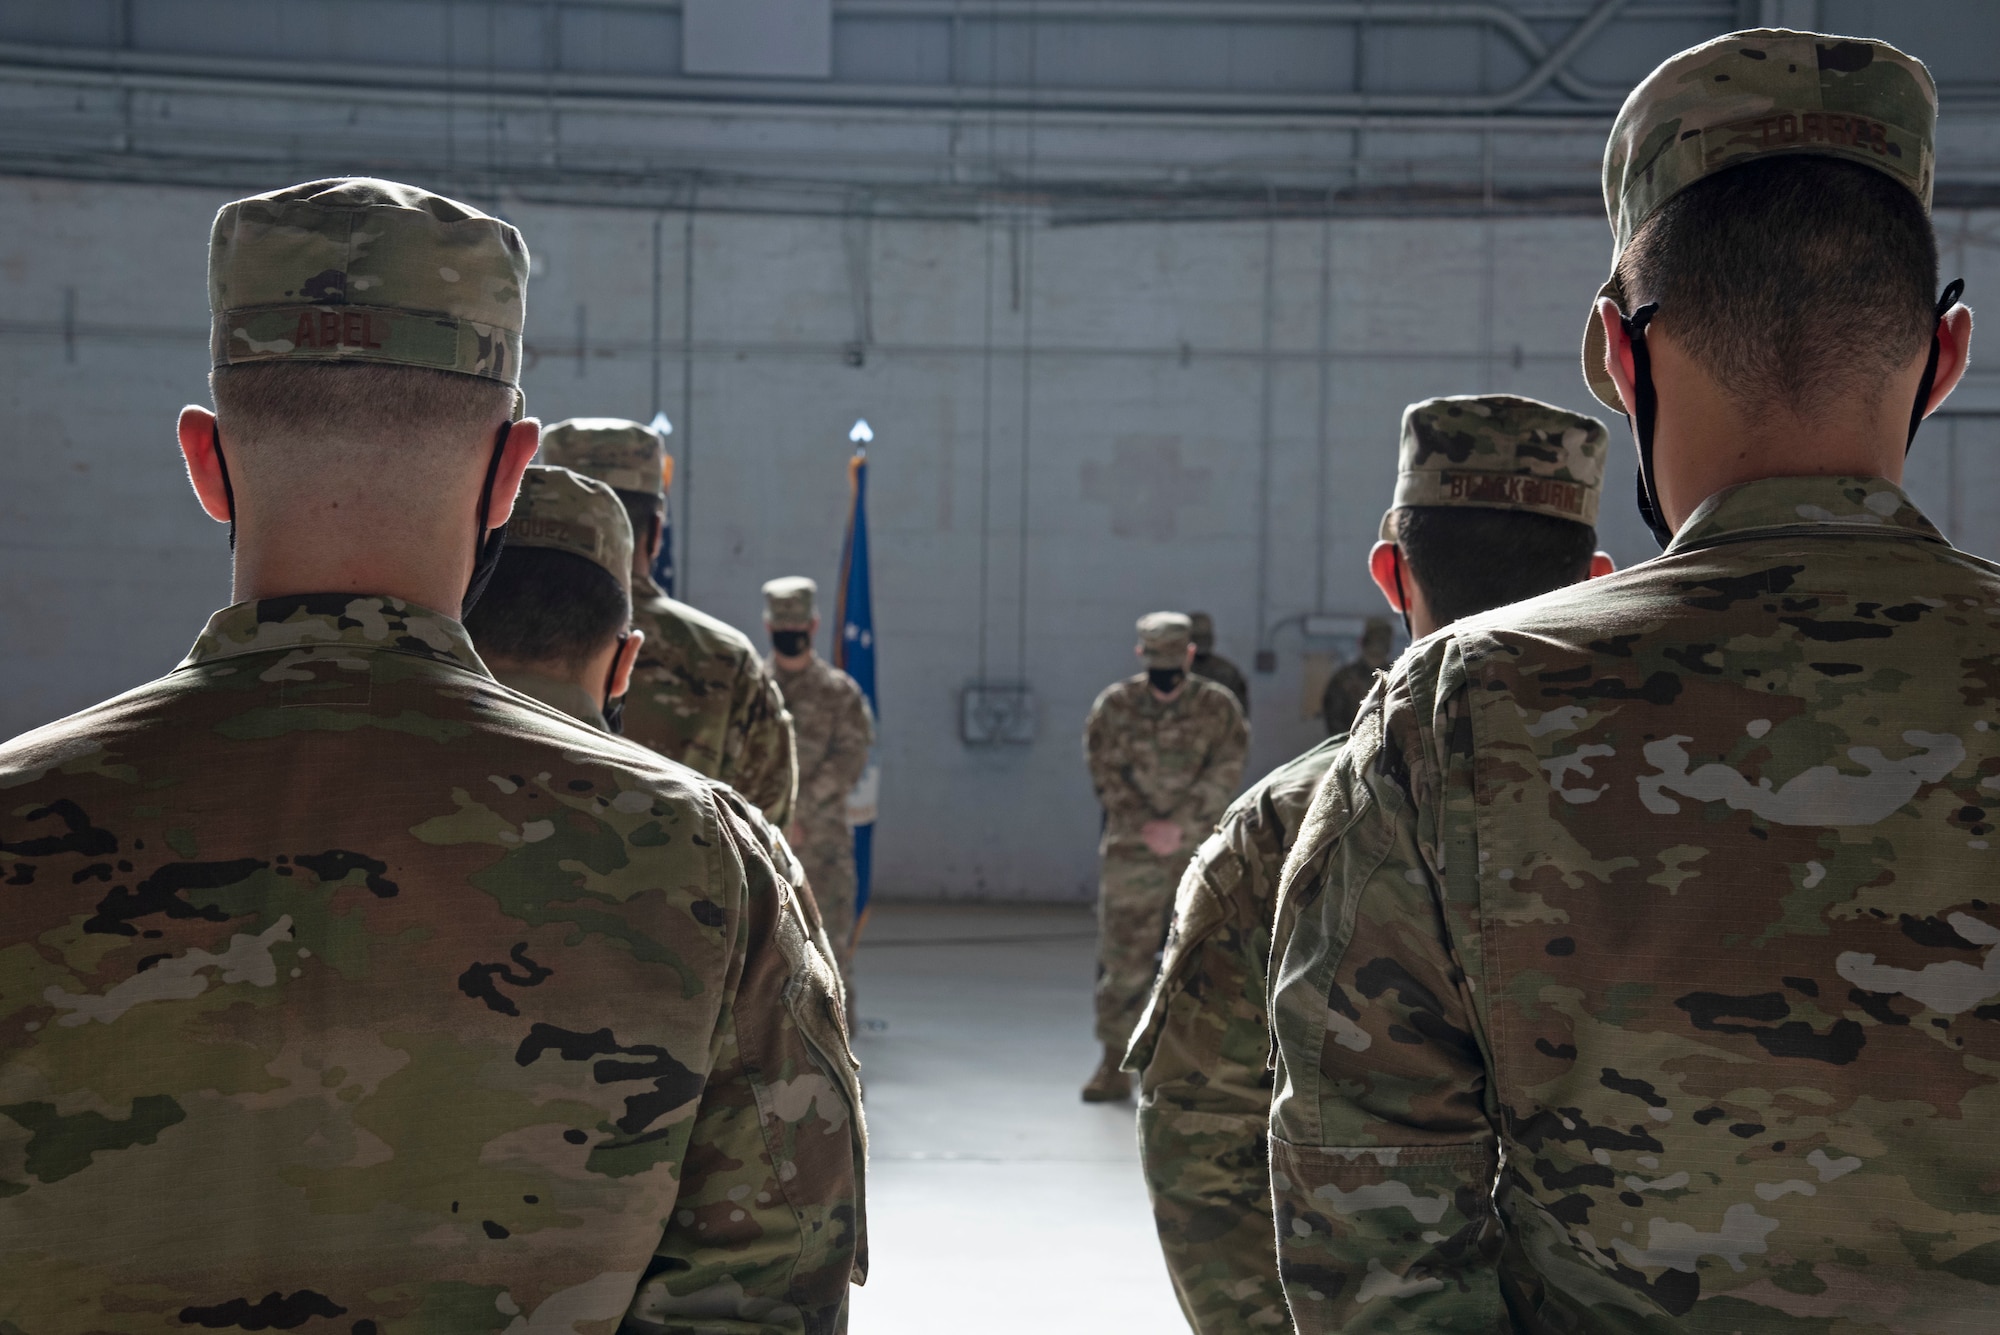 Airmen assigned to the 6th Maintenance Squadron (MXS), stand in formation and bow their heads during a change of command ceremony invocation, at MacDill Air Force Base, Florida, May 10, 2021.